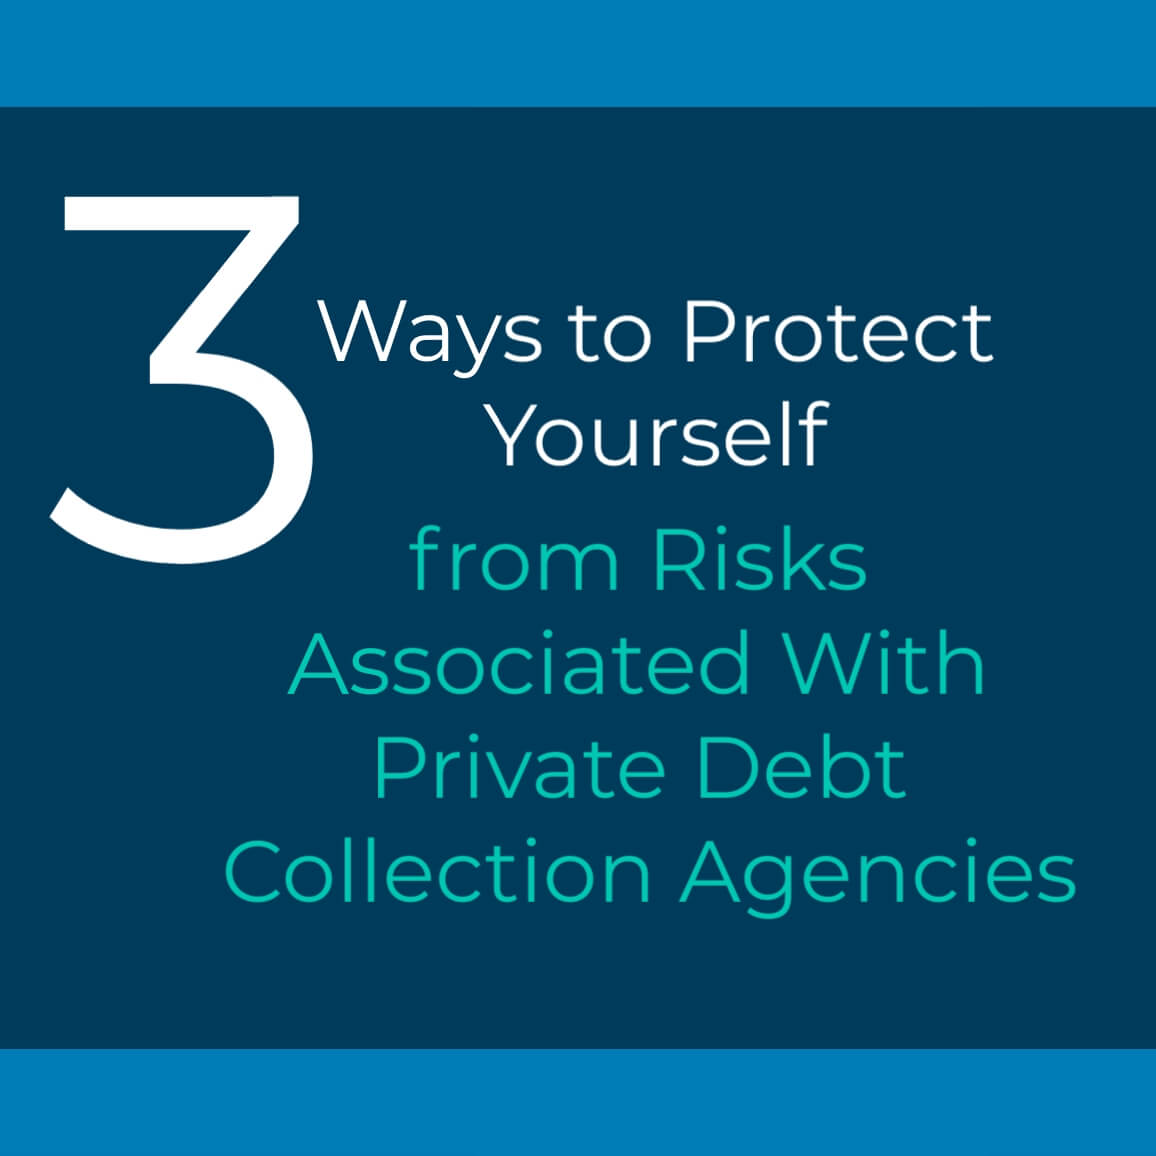 Three-Ways-to-Protect-Yourself pdf download